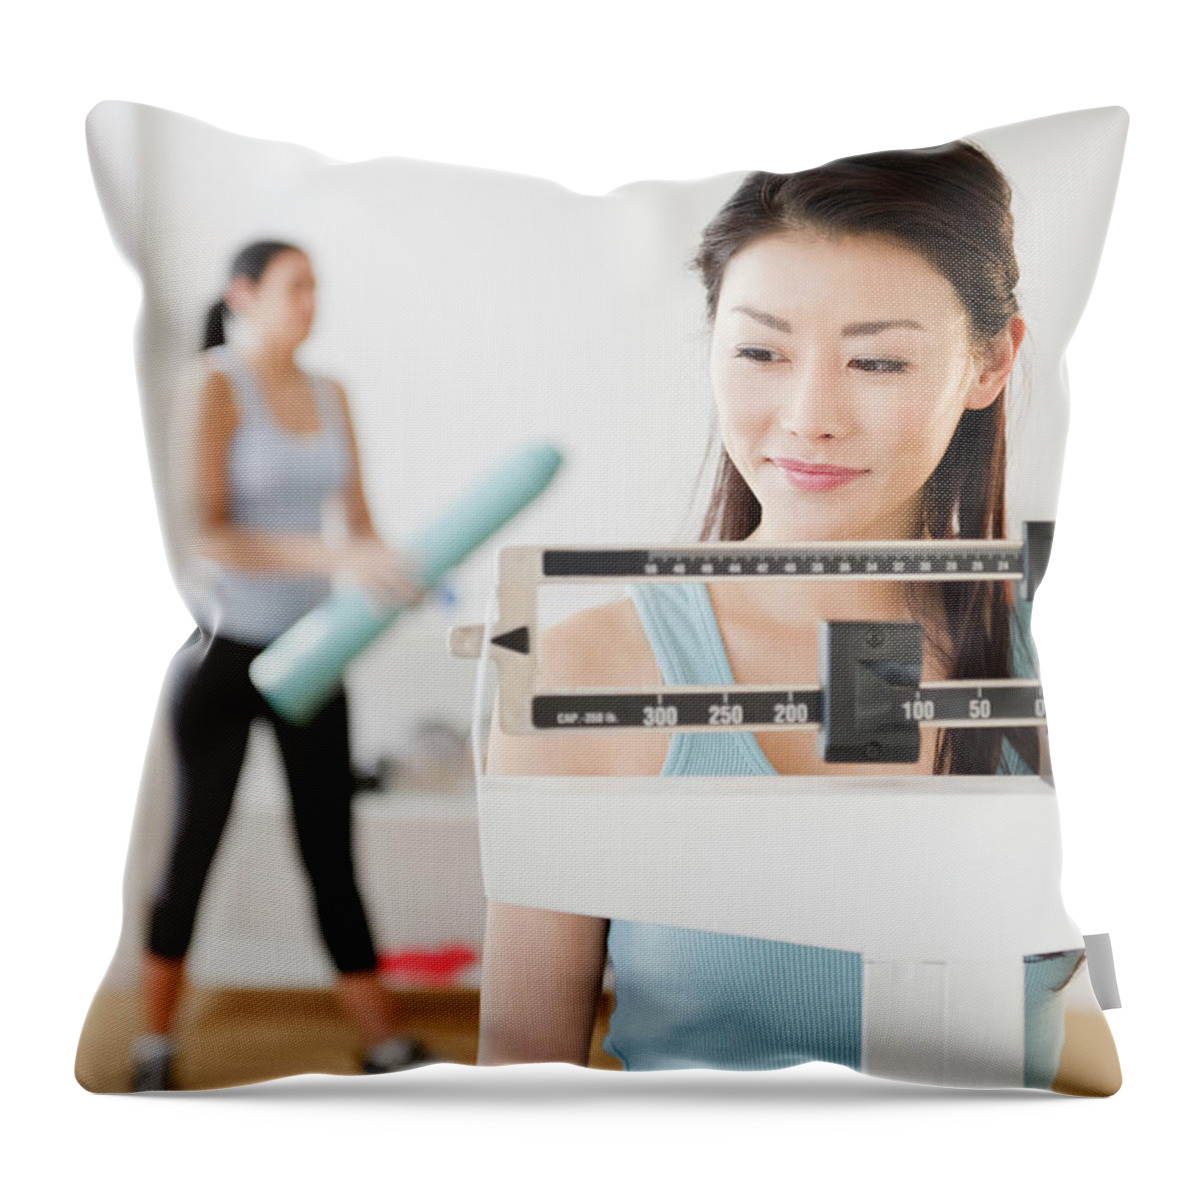 Asian And Indian Ethnicities Throw Pillow featuring the photograph Asian Woman Weighing Herself On Scale by Jgi/jamie Grill